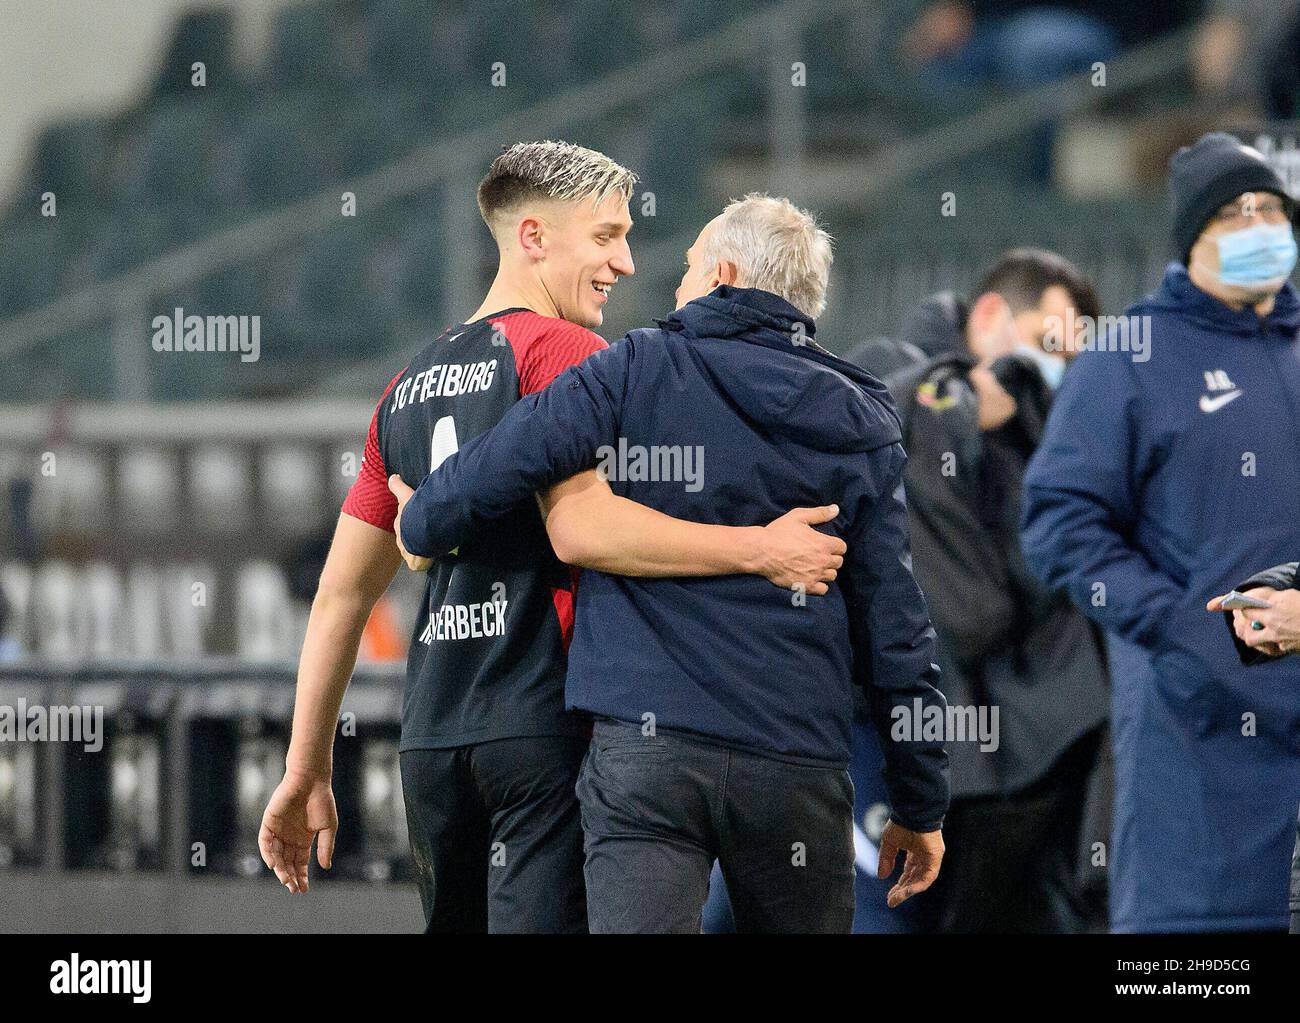 coach Christian STREICH (FR) arm in arm with Nico SCHLOTTERBECK l. (FR), substitution, football 1st Bundesliga, 14th matchday, Borussia Monchengladbach (MG) - SC Freiburg (FR) 0: 6, on December 5th, 2021 in Borussia Monchengladbach/Germany. #DFL regulations prohibit any use of photographs as image sequences and/or quasi-video # Â Stock Photo